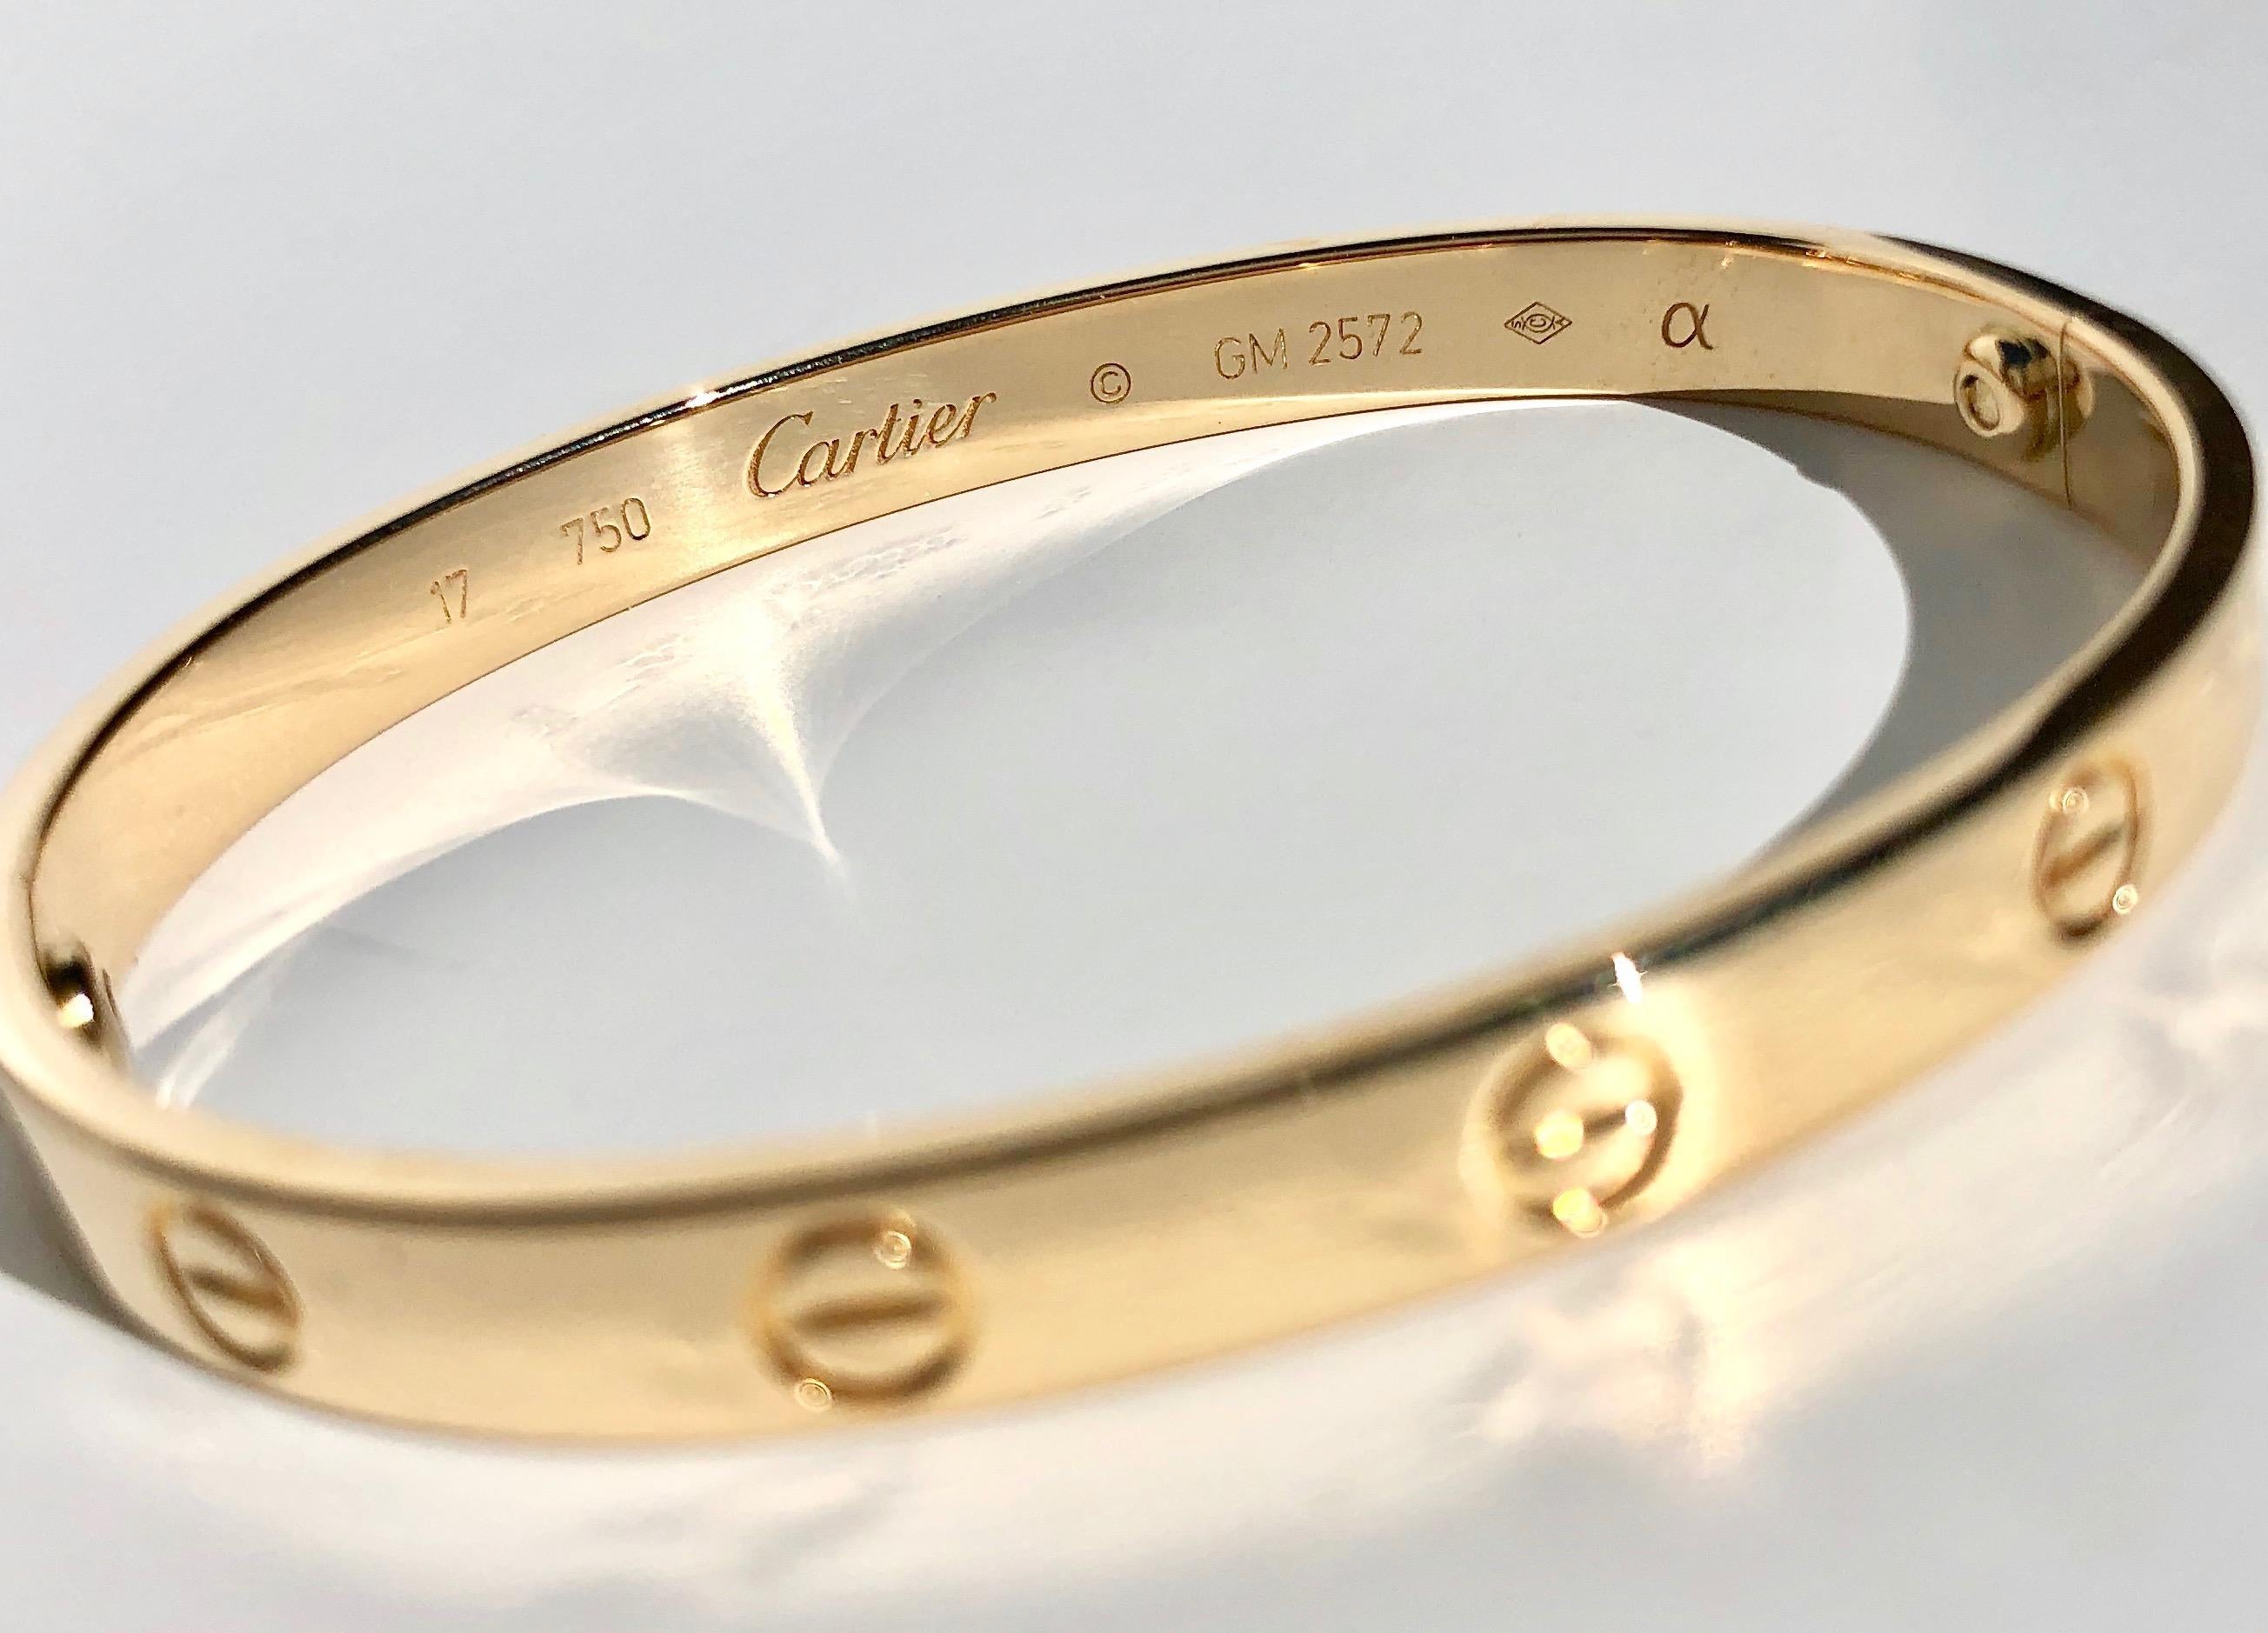 Cartier 18k Yellow Gold Love Bracelet, with Box/Papers 6